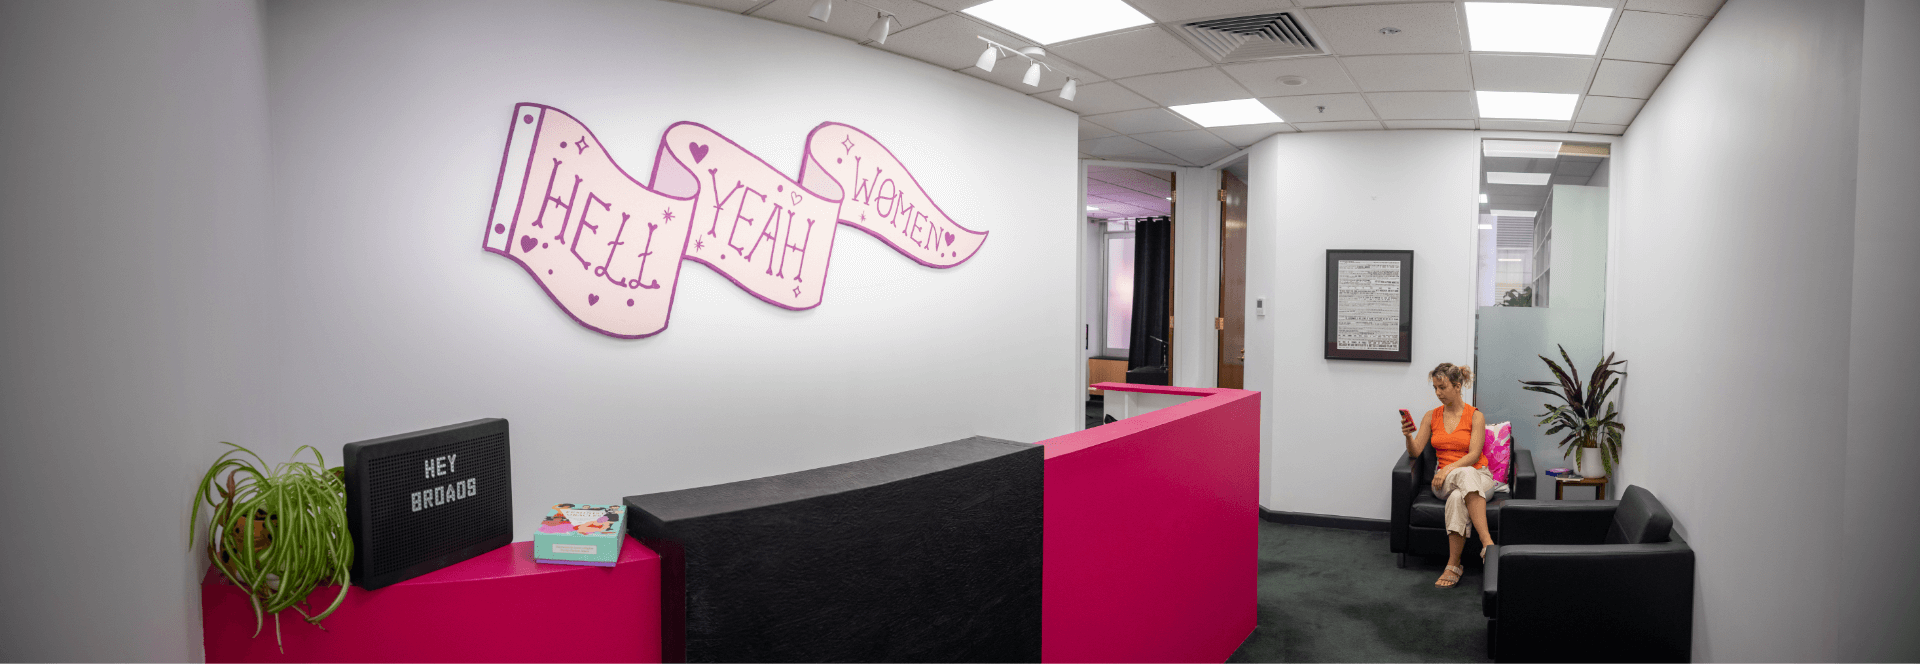 A panoramic shot of the Broad Studios office with a big wall art piece that says "hell yeah girls" above the front desk